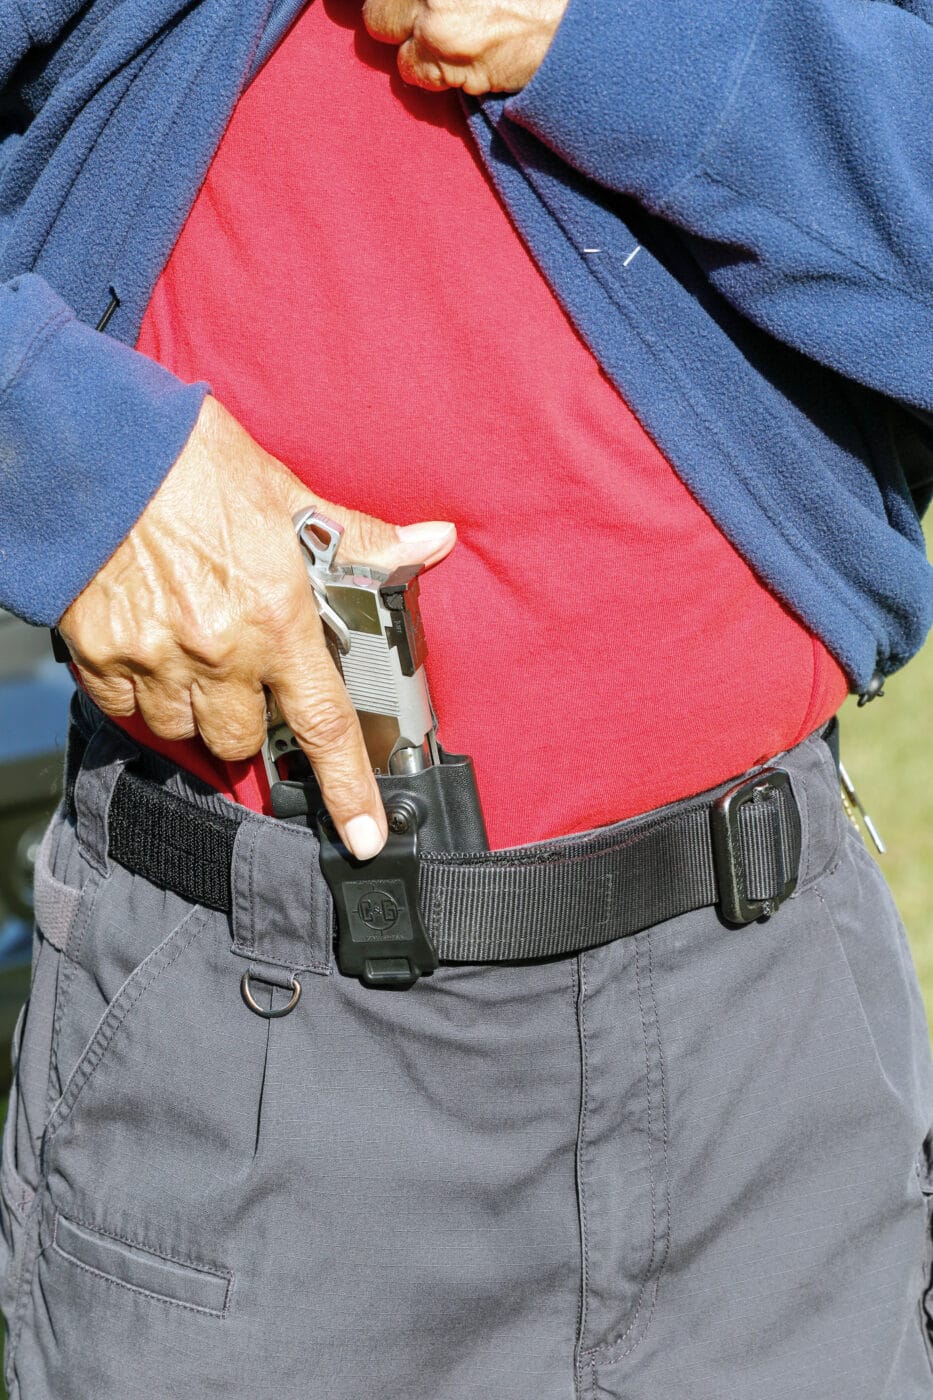 Carrying the 1911 in appendix